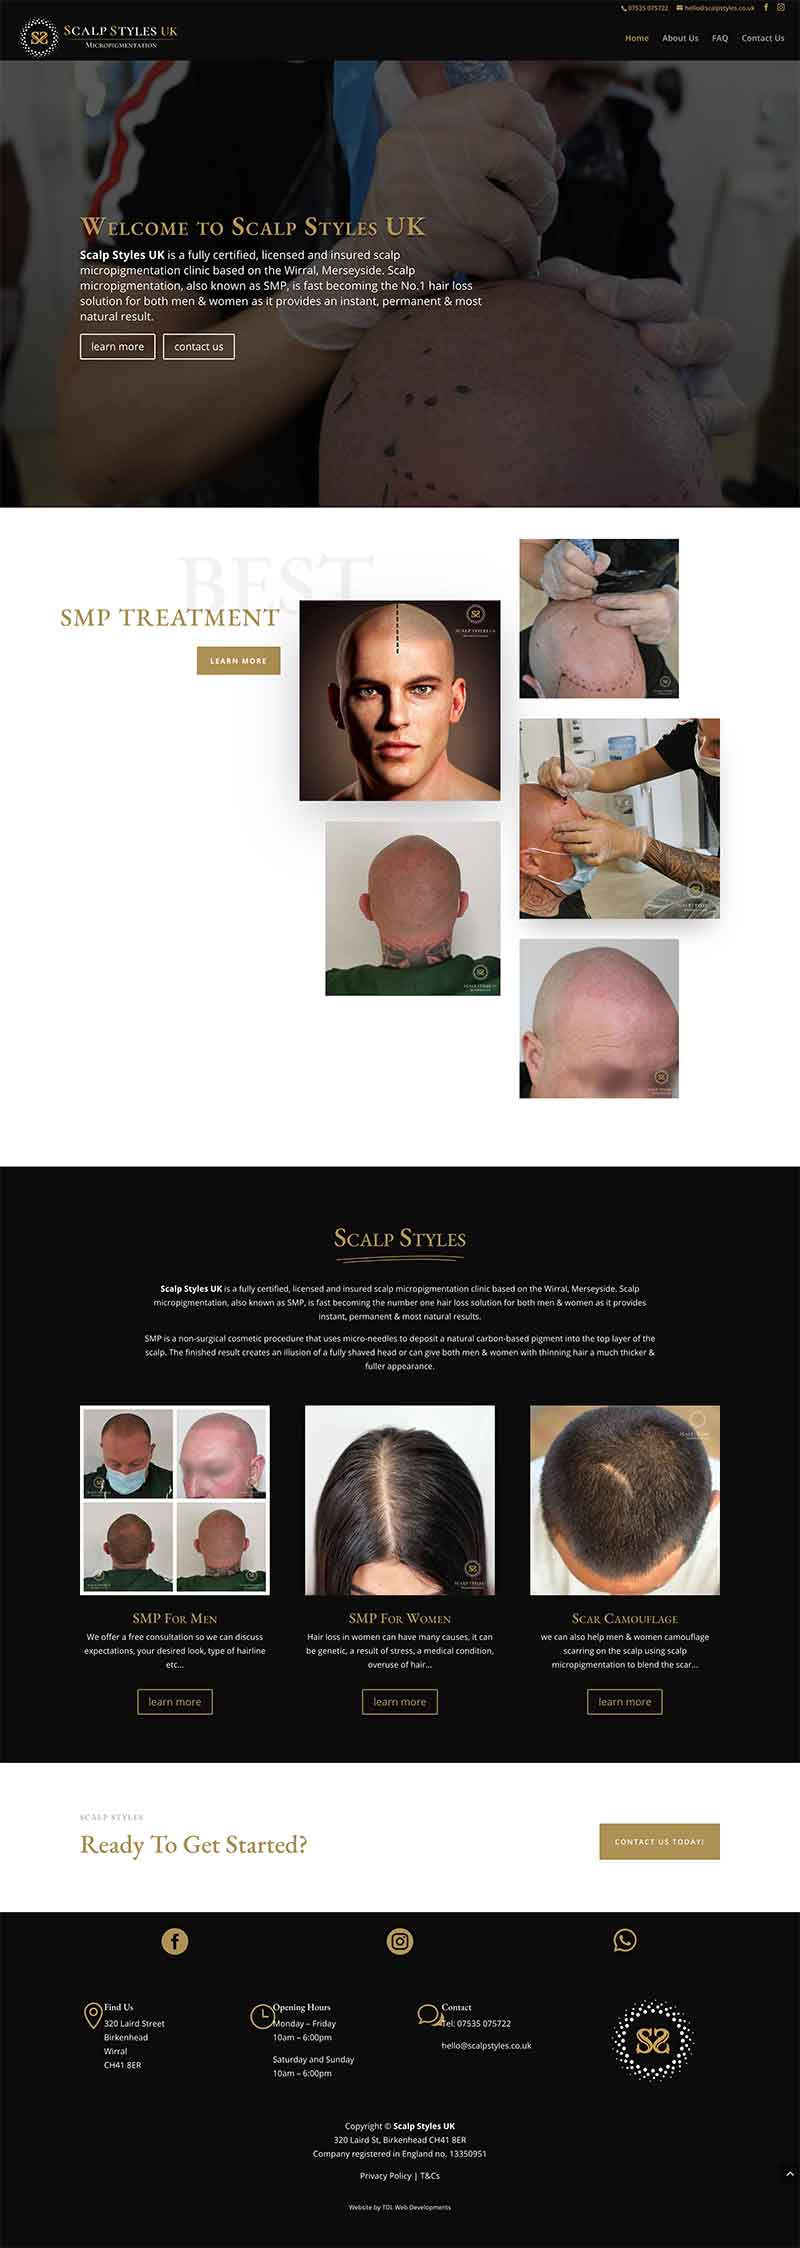 Full page screenshot of Scalp Styles UK's home page